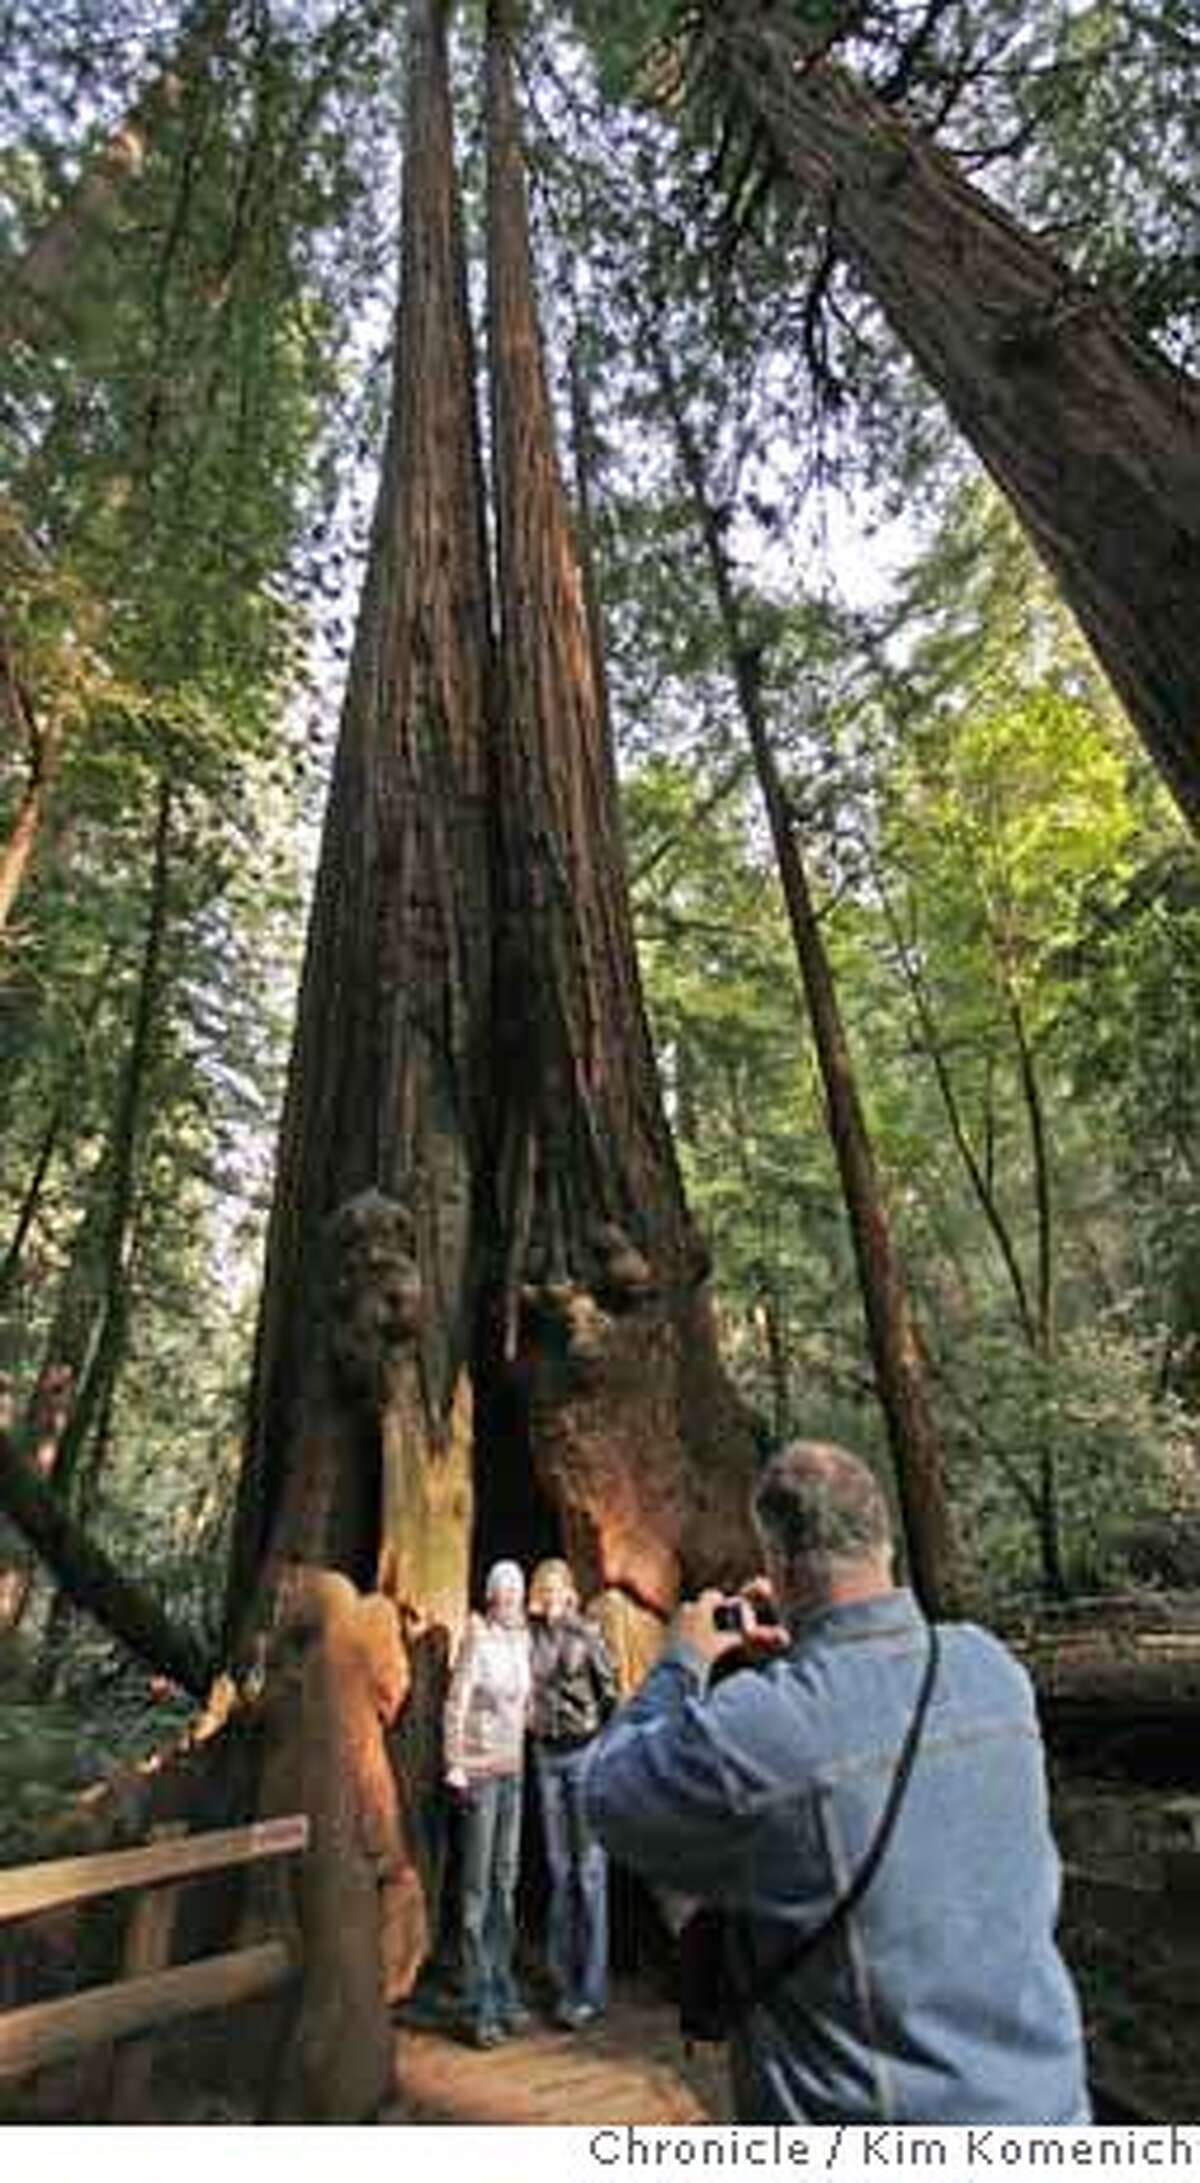 MUIRWOODS_265_KK.JPG Sheri Nikolakopulos and Kathy Norris, both of Los Angeles asked Gordon Robbins of Austin Texas to take their picture in the hollow trunk of a redwood in Bohemian Grove at Muiir Woods Friday morning. January 2008 will mark the 100th anniversary of the dedication of Muir Wood, an area that if not for Congressman William Kent, would be under 1,000 feet of water. Photo by Kim Komenich/The Chronicle **Sheri Nikolakopulos, Kathy Norris, Gordon Robbins Ran on: 12-17-2007 Gordon Robbins of Austin, Texas, takes a picture of Sheri Nikolakopulos and Kathy Norris, who are both from Los Angeles, as they stand in the hollow trunk of a redwood tree in Bohemian Grove at Muir Woods.